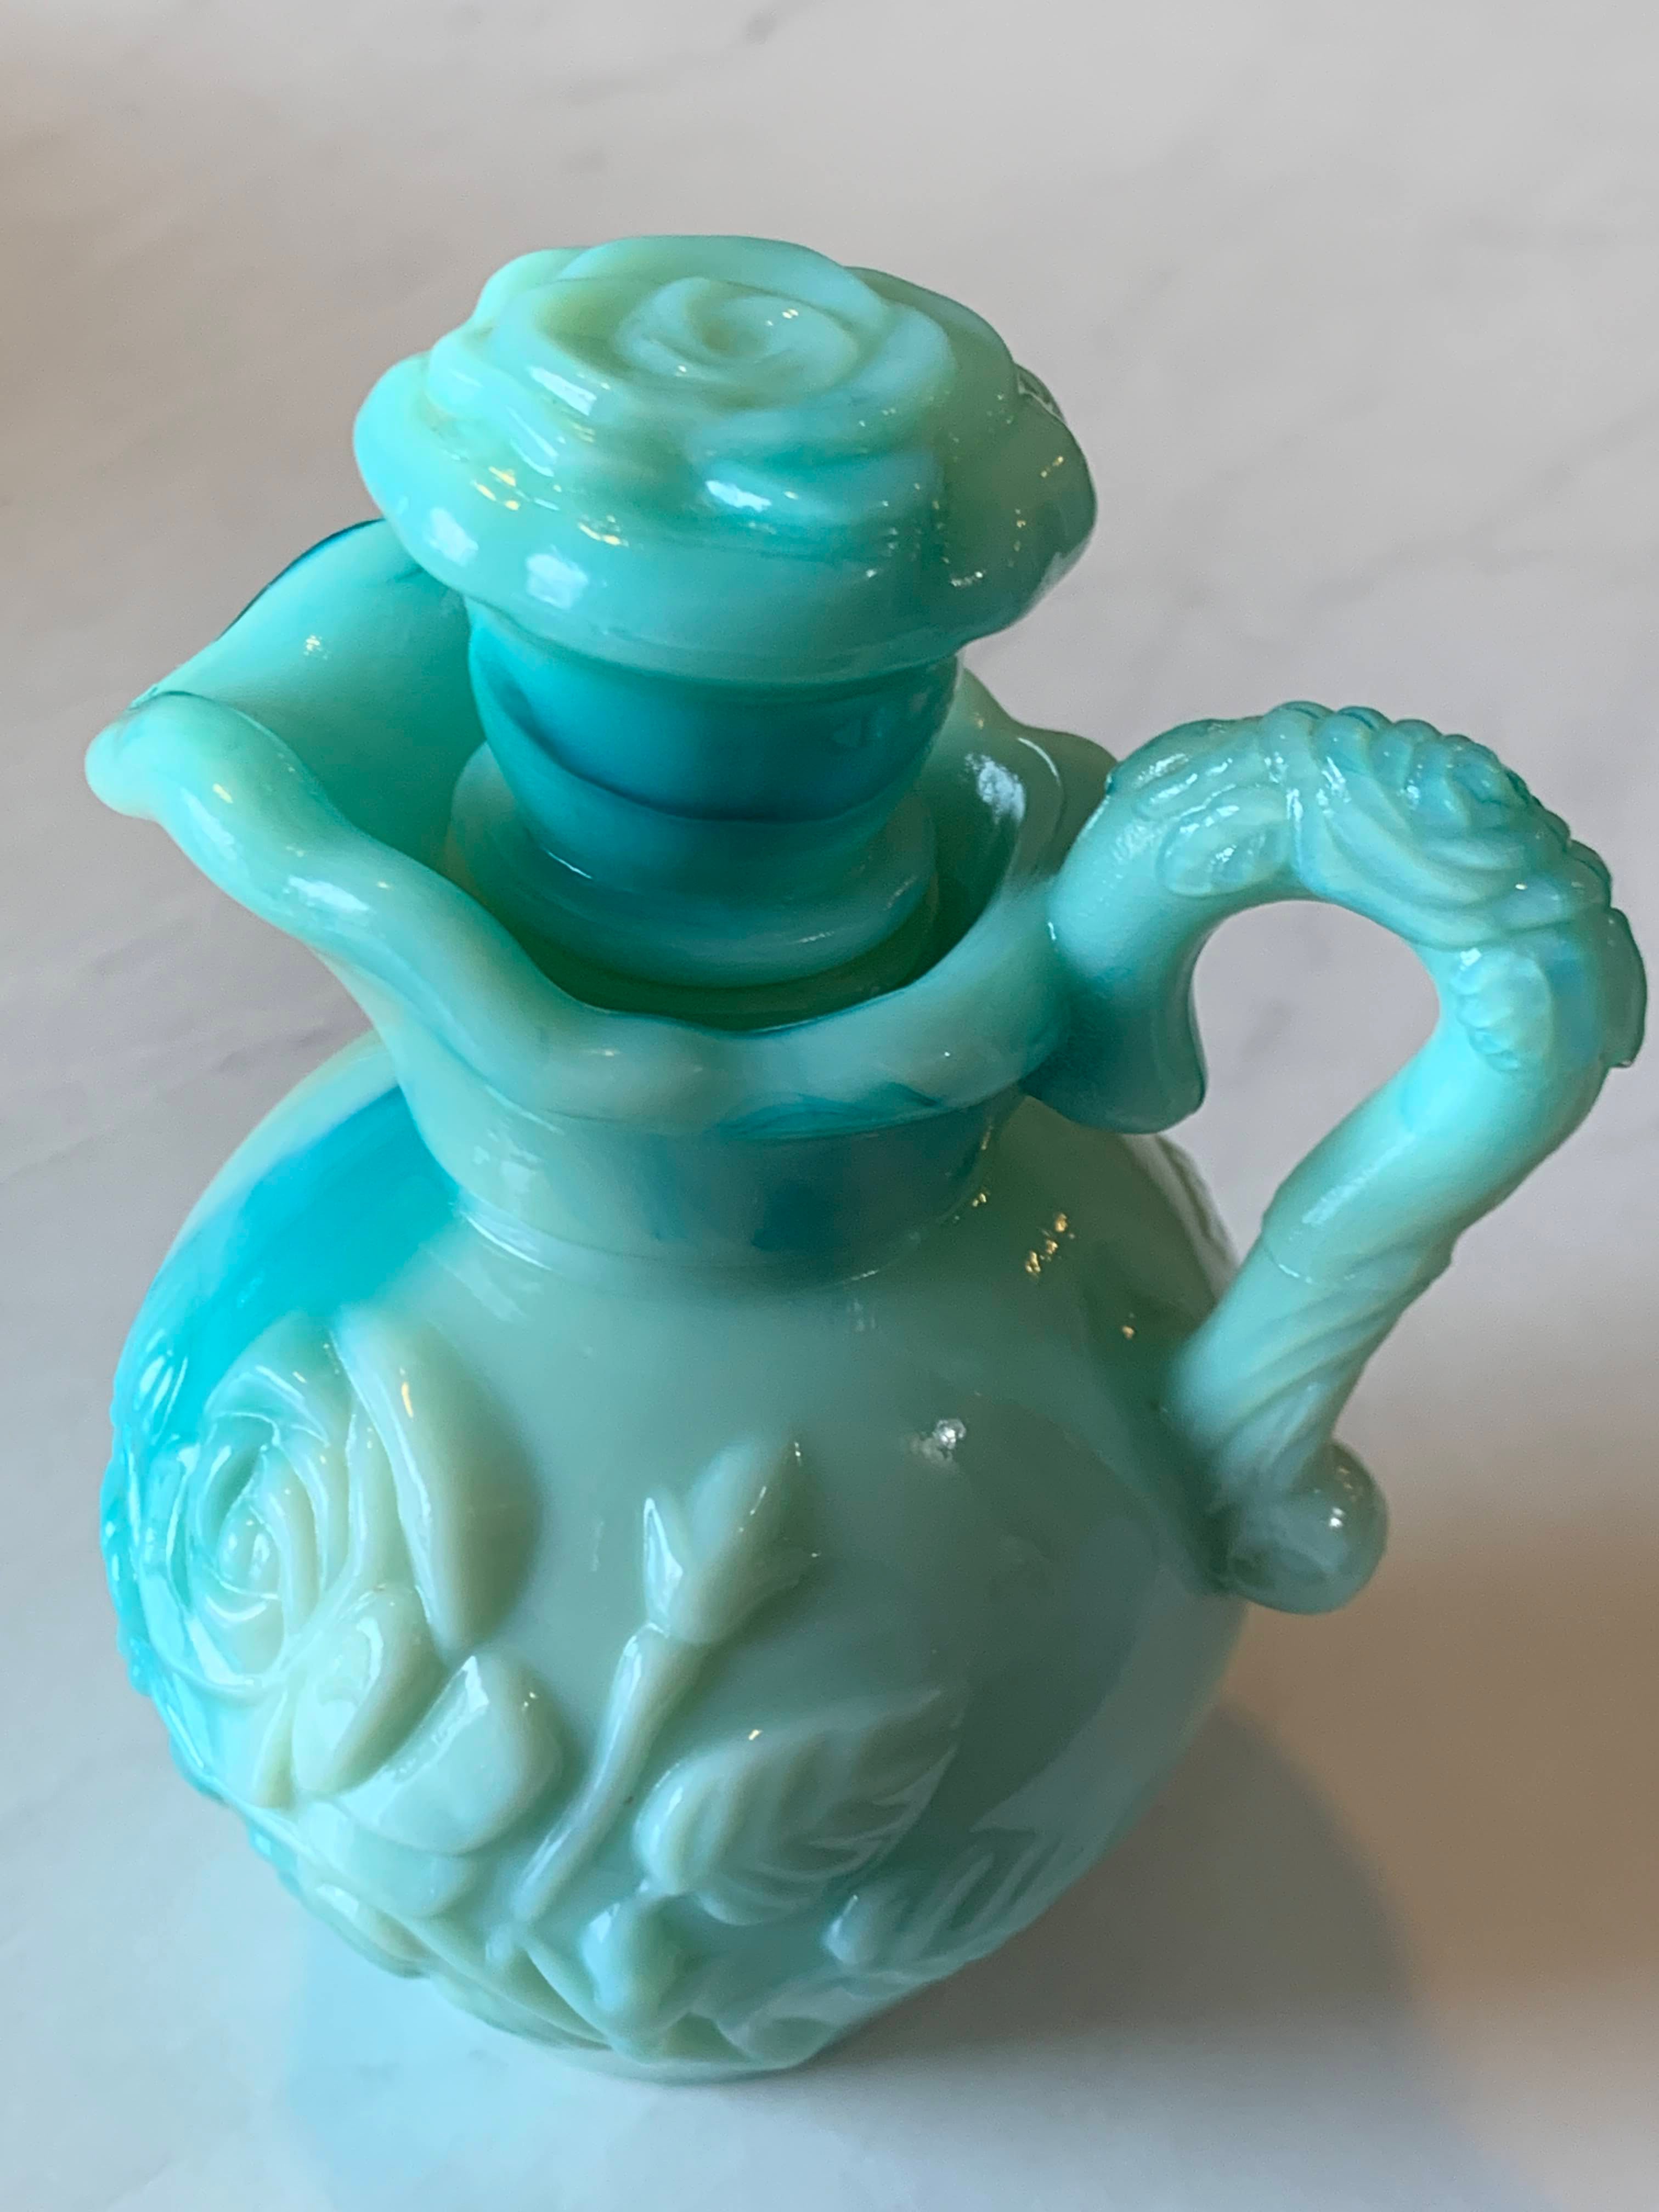 Porcelain Opaque Milk Glass - Collectible - Turquoise Blue Color - Brand New, Classy - Avon